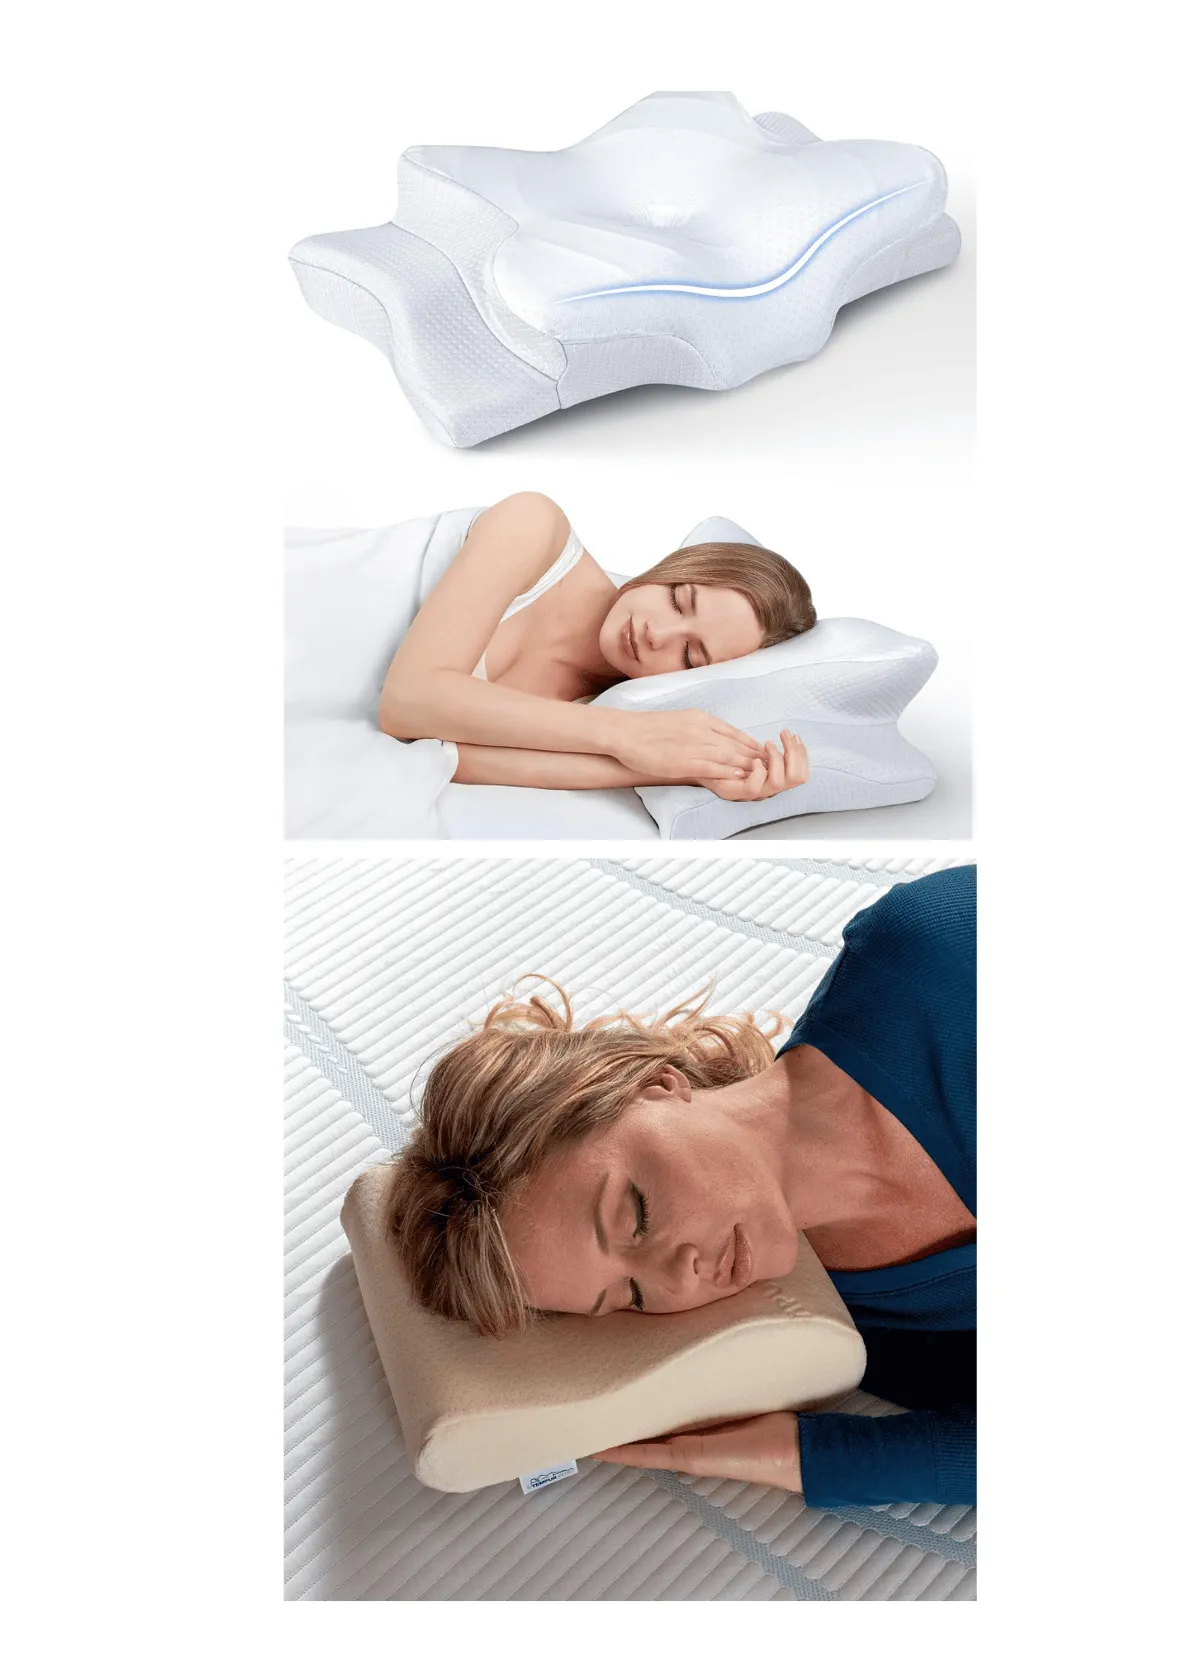 "Best Neck Pillow Picks for Travel, Pain Relief & Comfy Sleep"